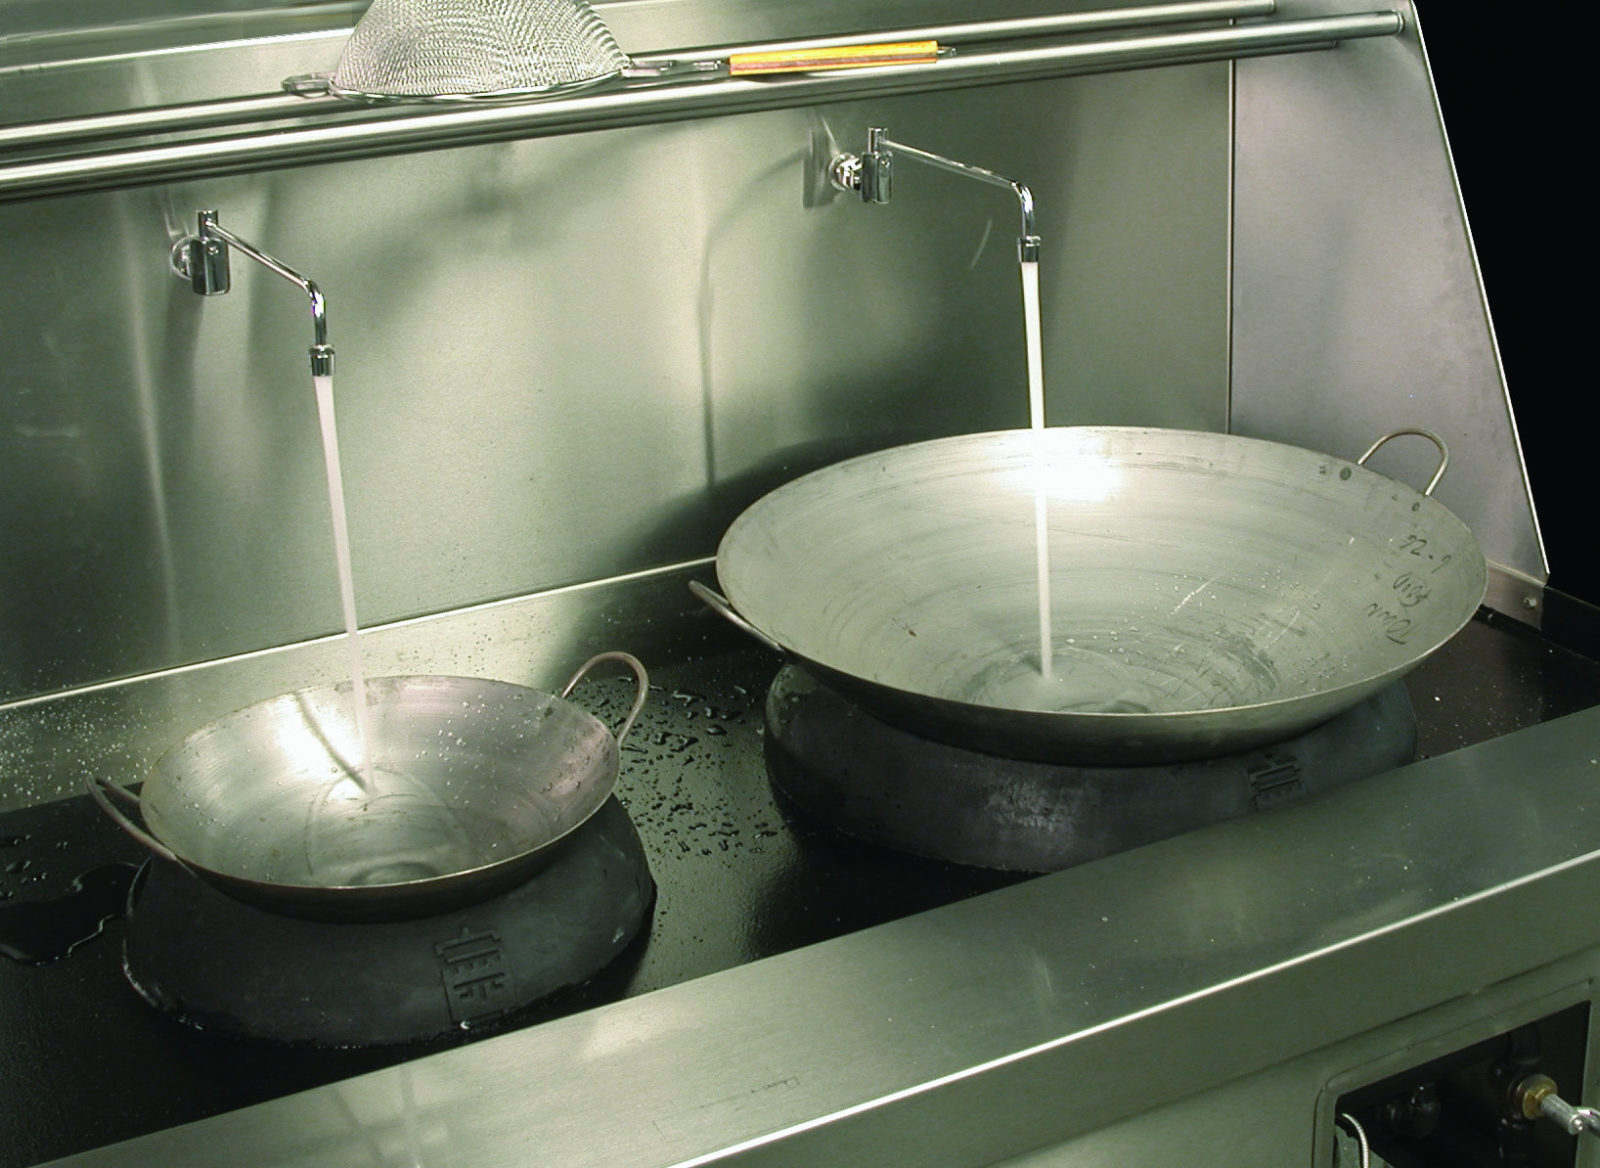 Large Wok - Container Source